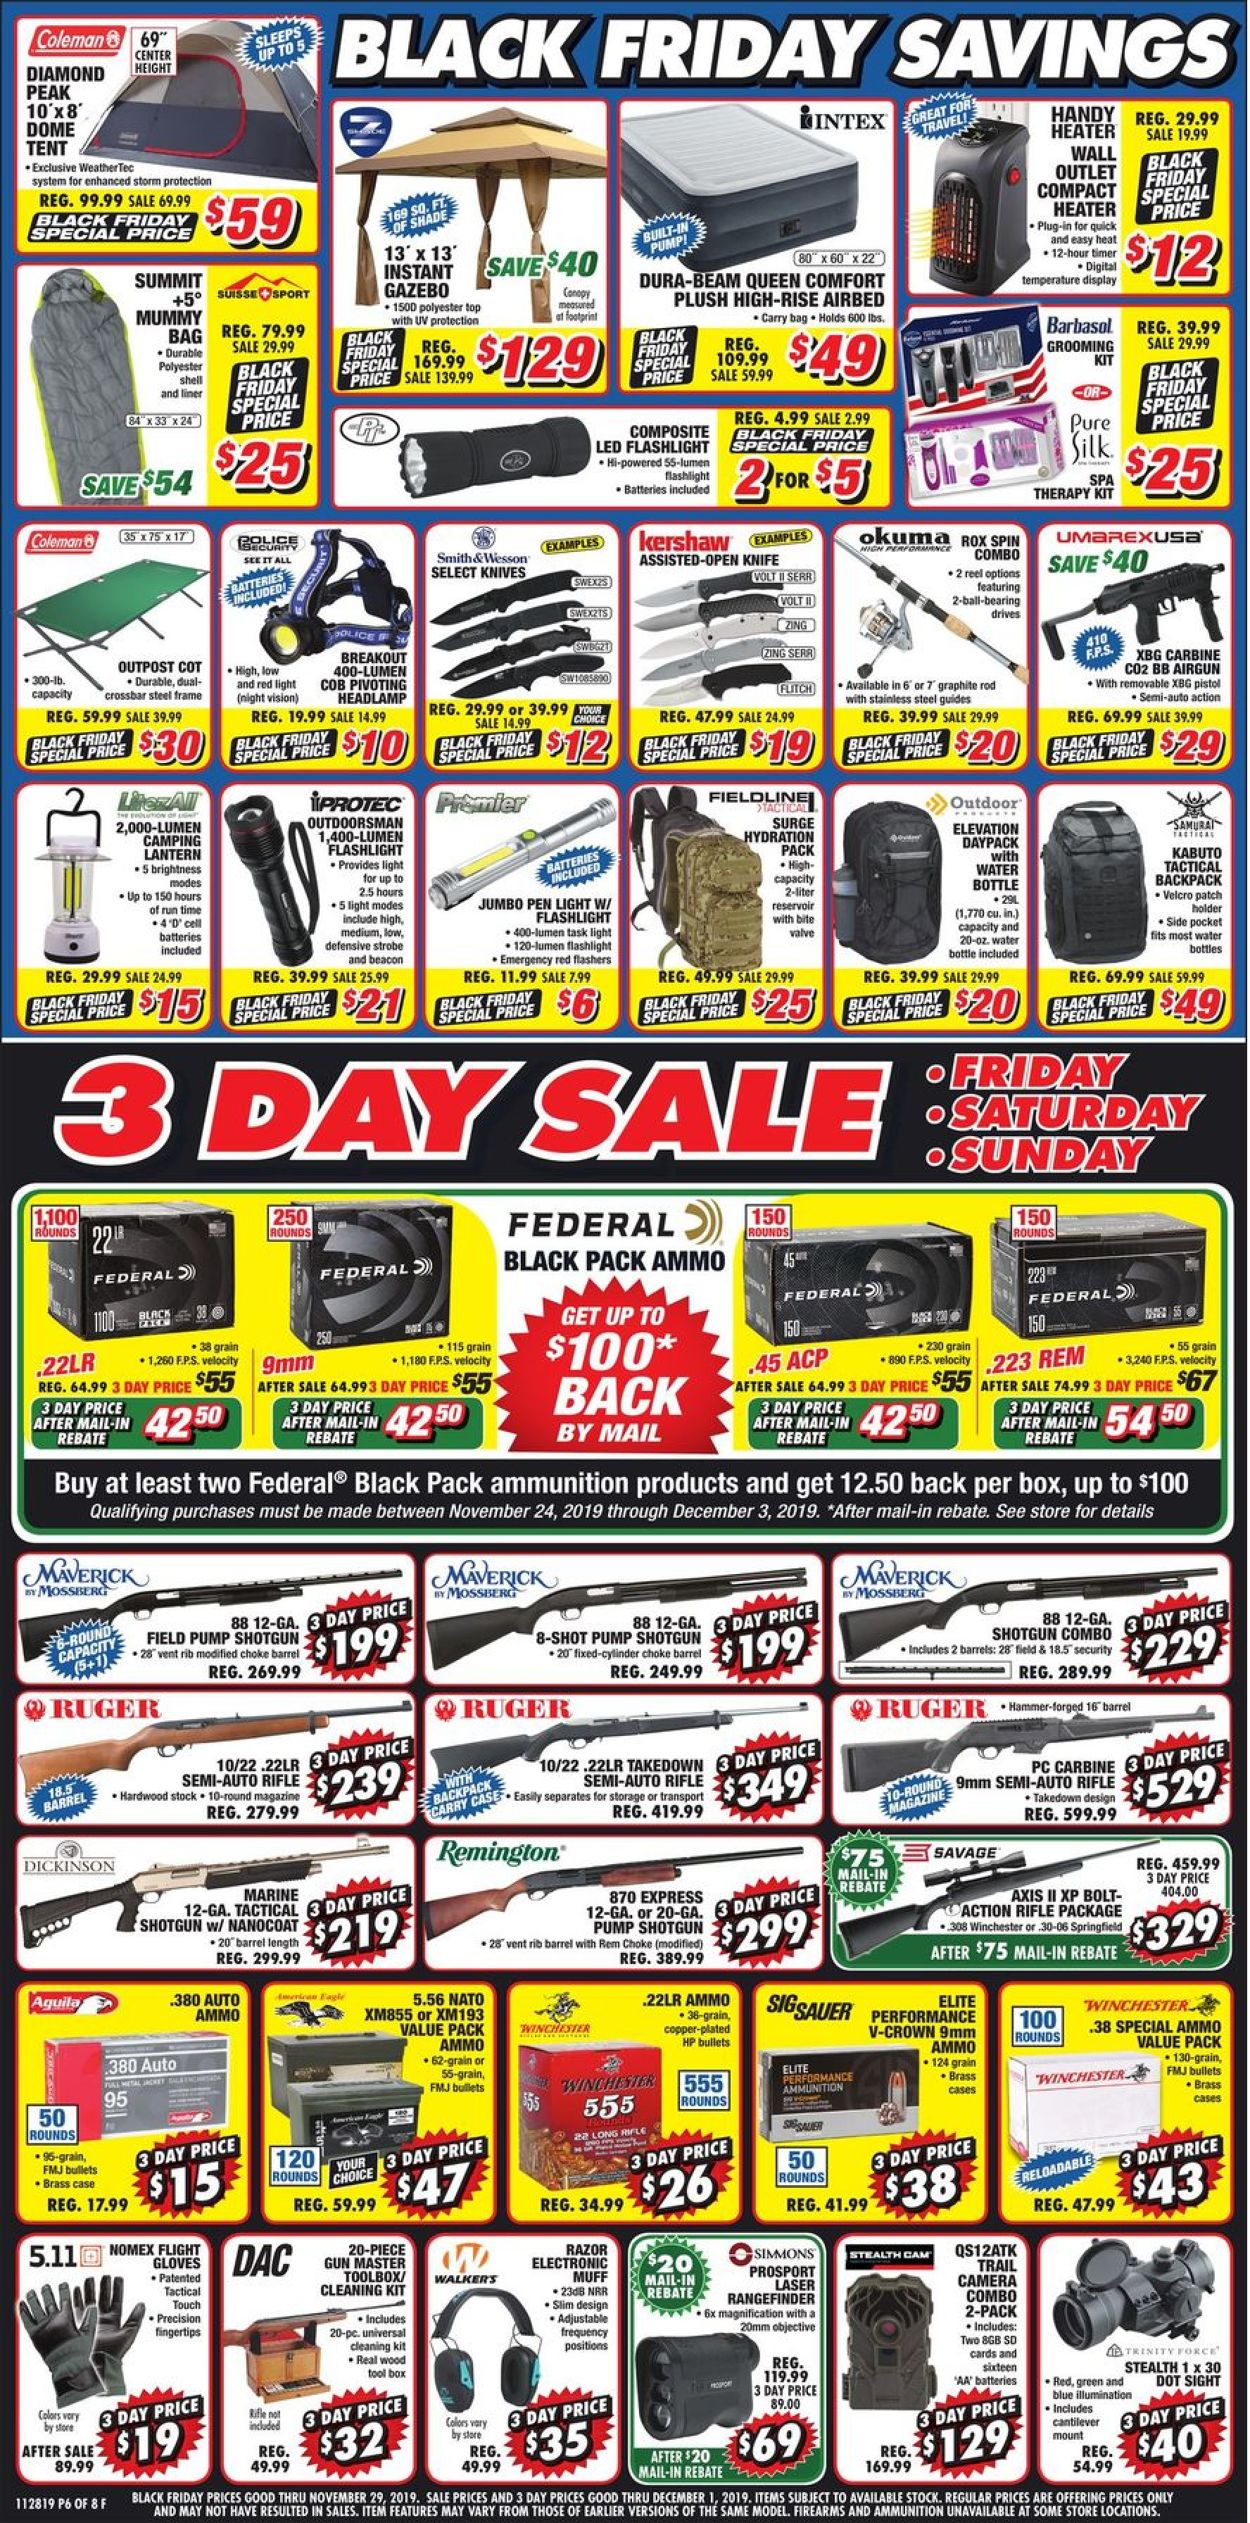 Catalogue Big 5 - Black Friday Special Prices 2019 from 11/29/2019